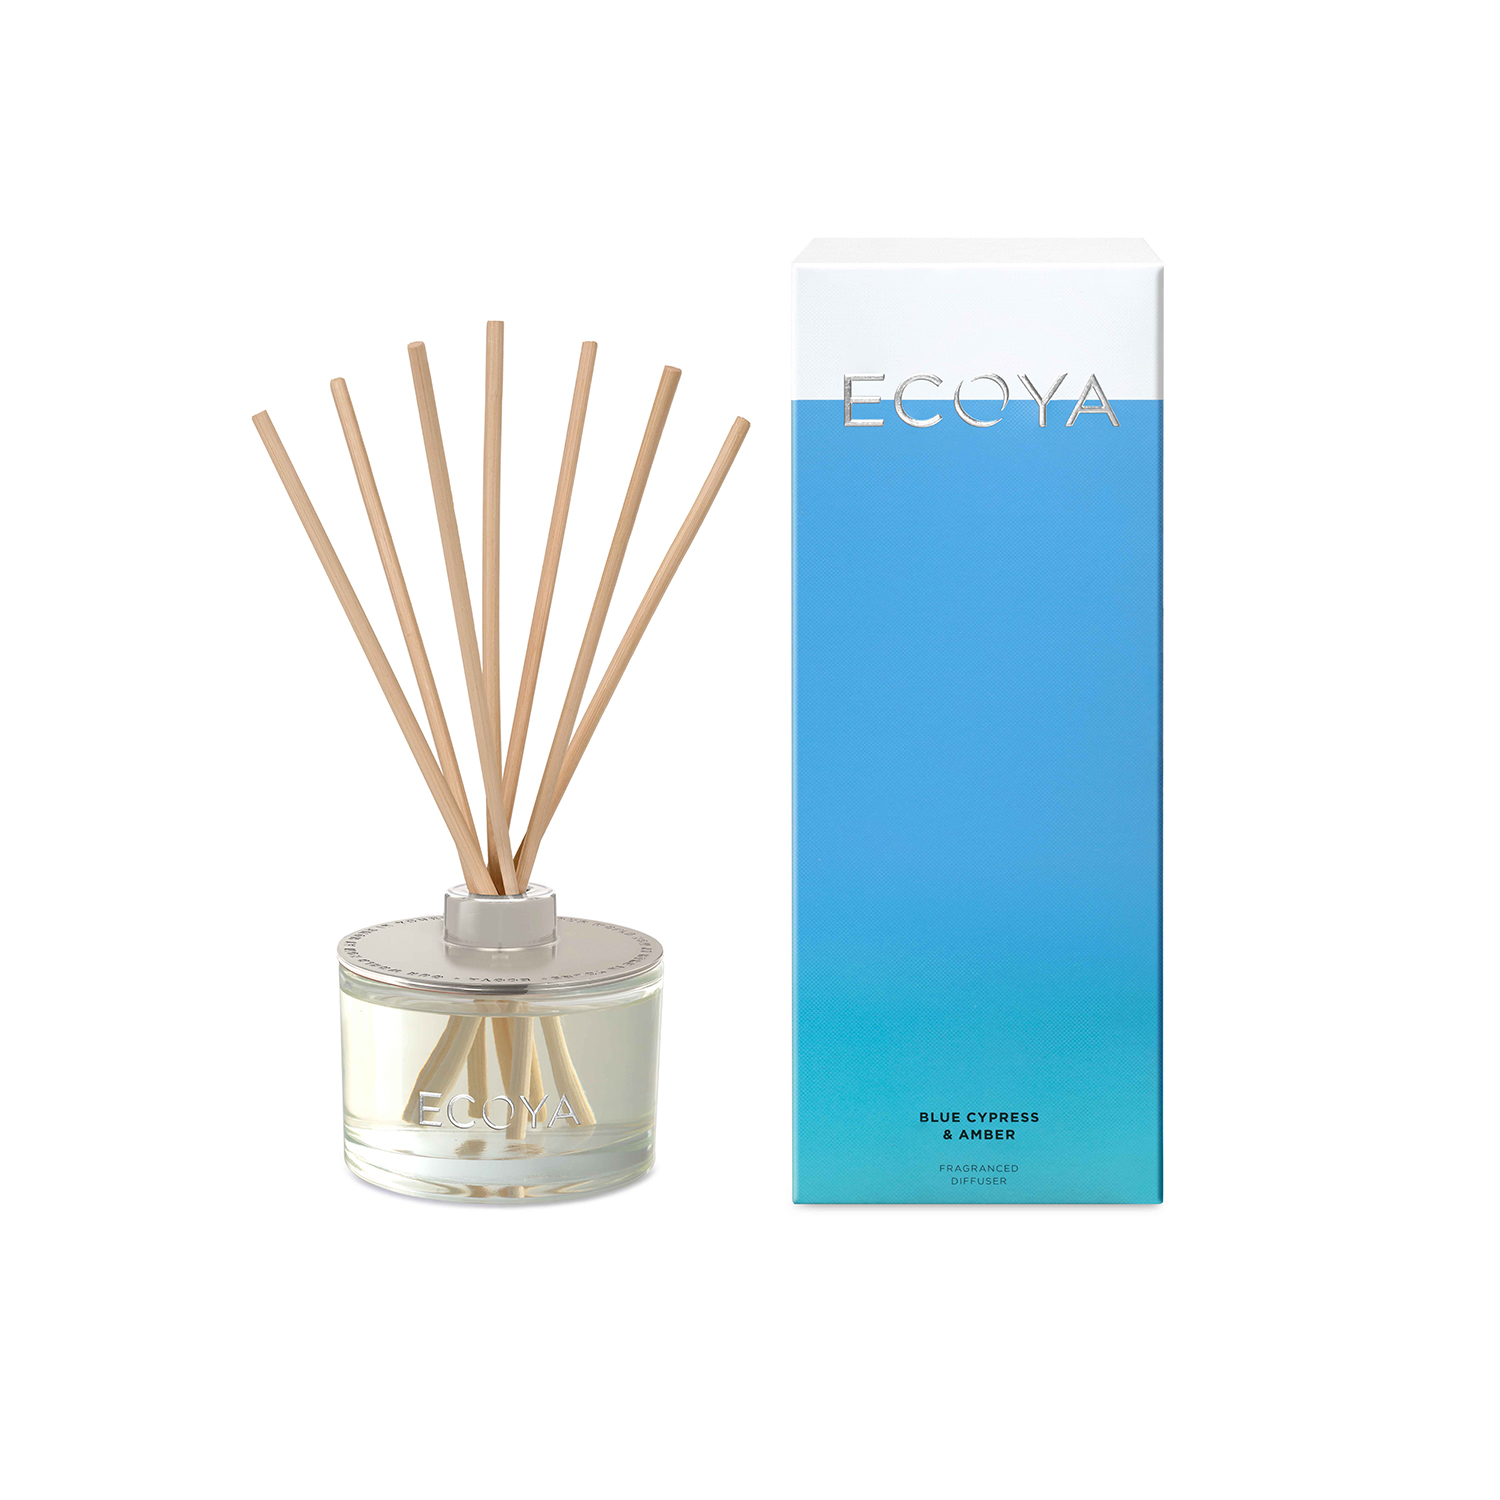 Ecoya Blue Cypress and Amber Reed Diffuser 200ml